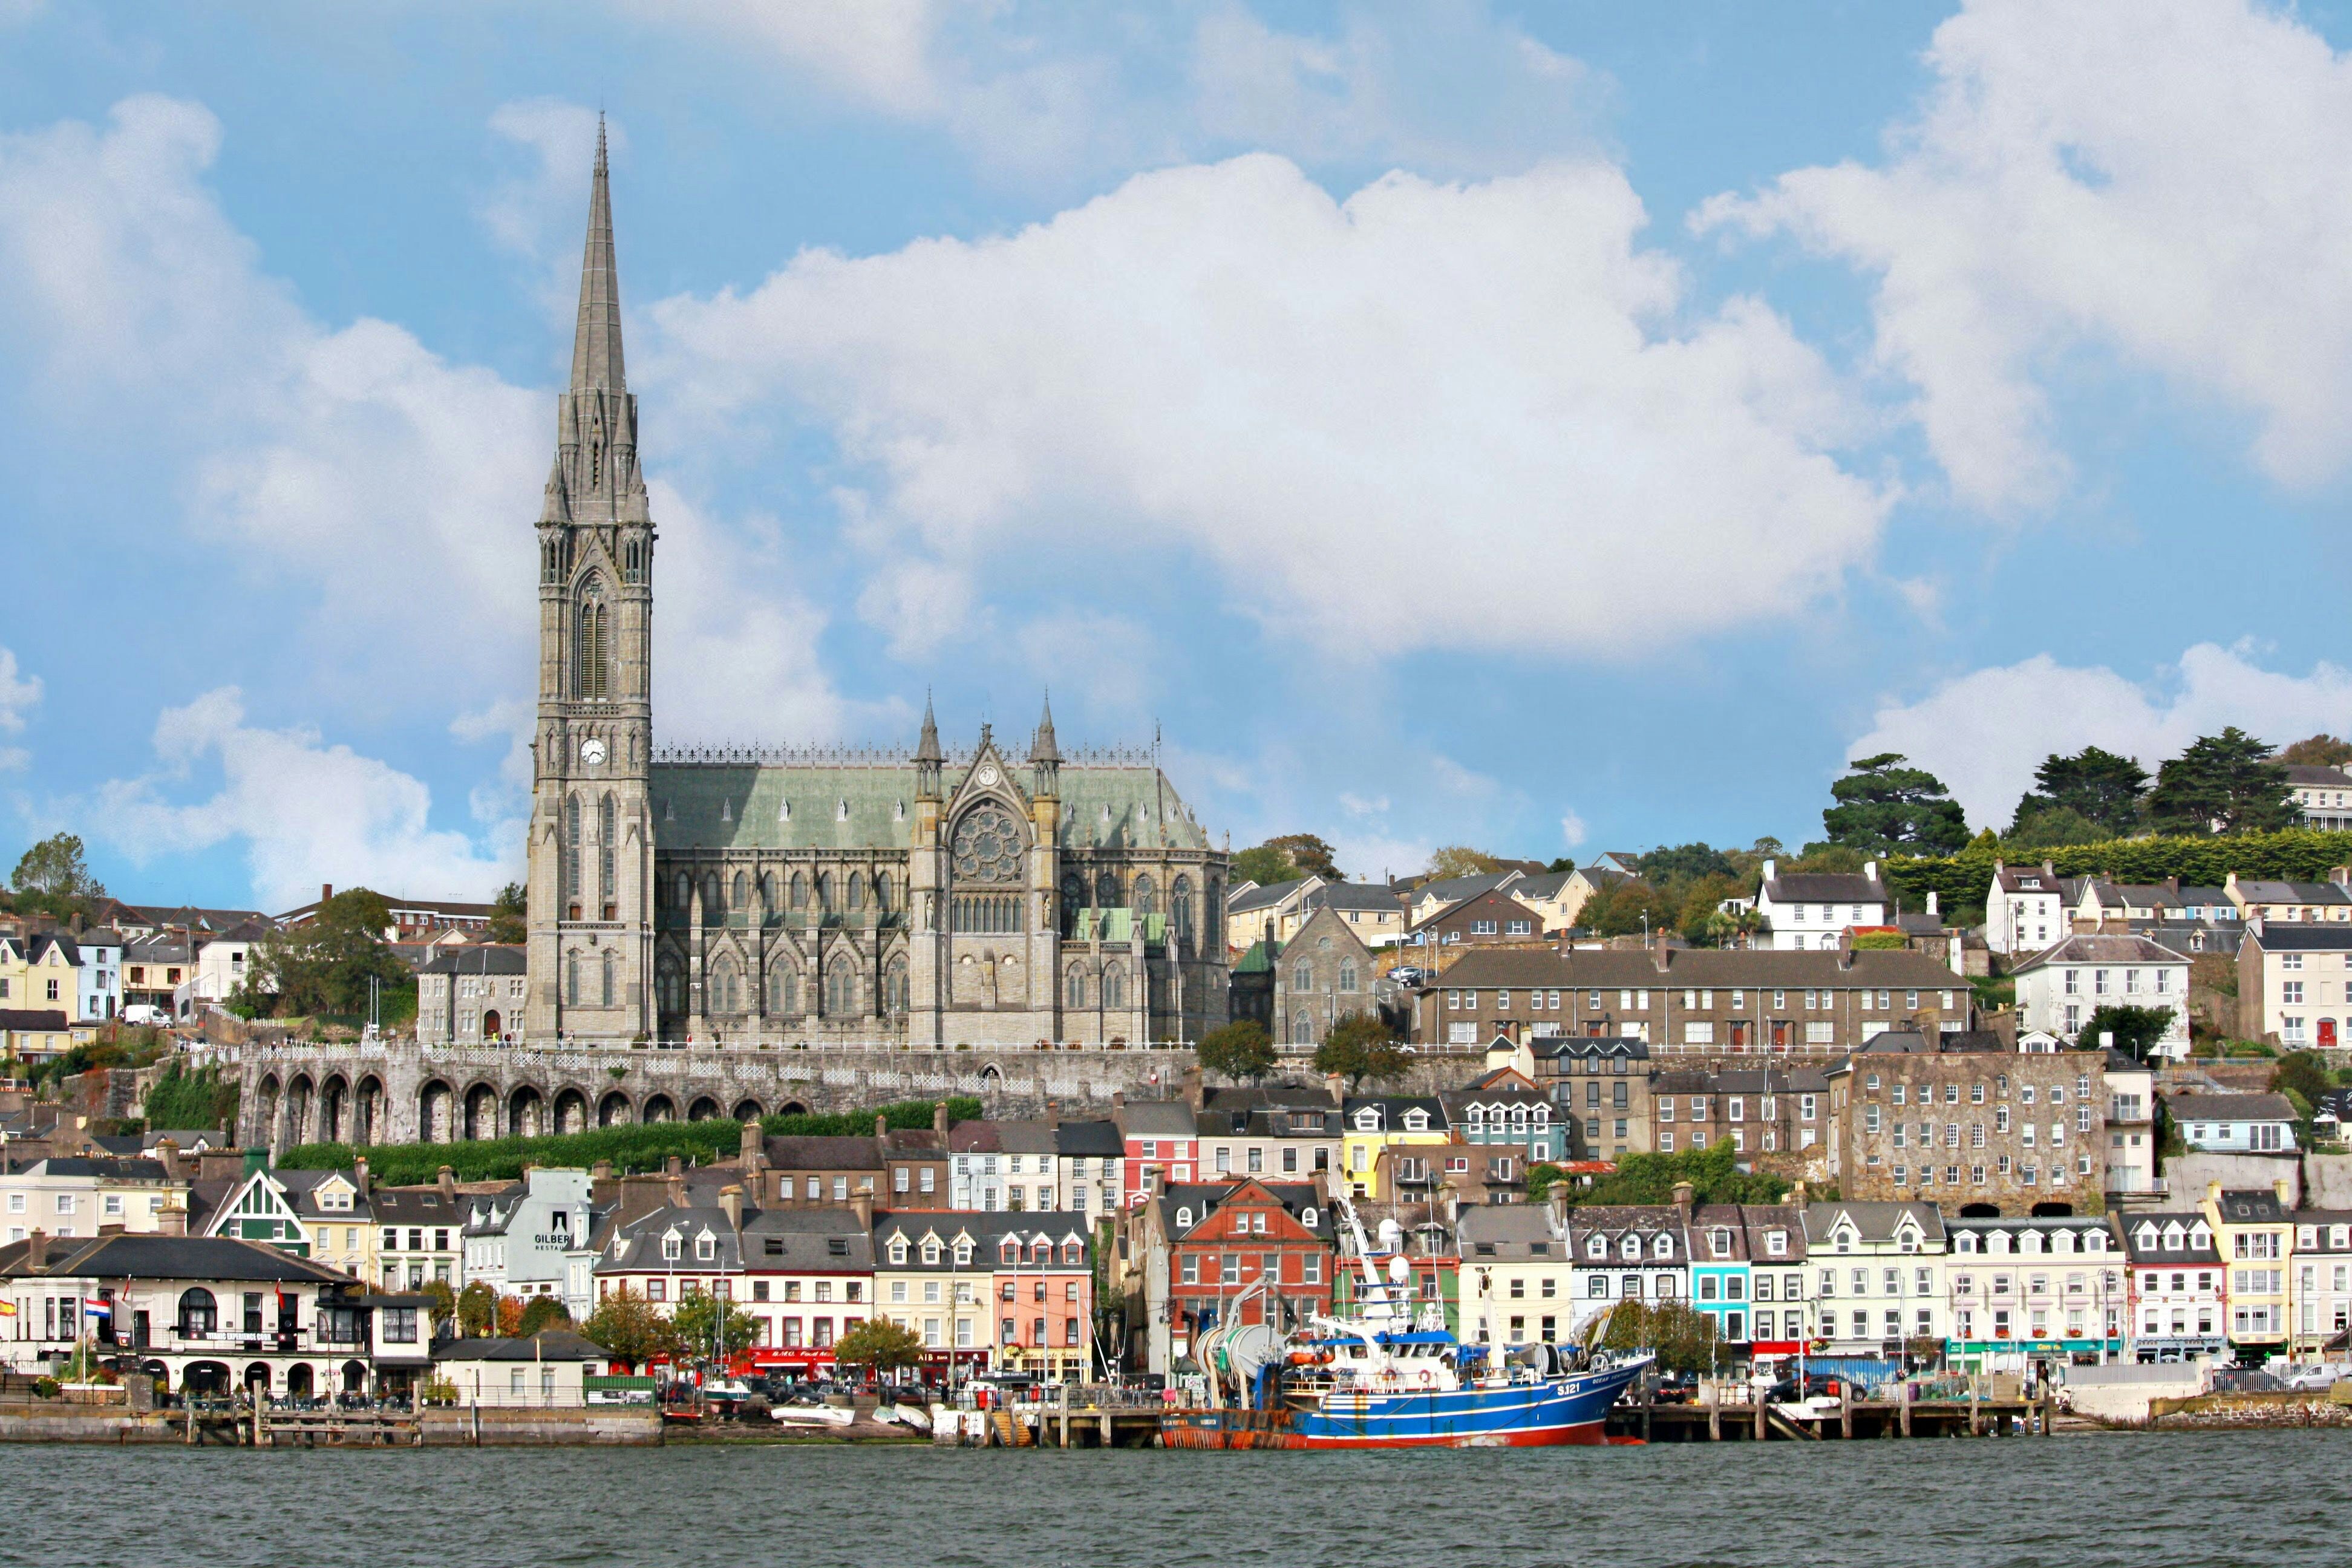 Managed to capture this view of the Cobh, Ireland skyline from the water, on our way back from Spike Island.